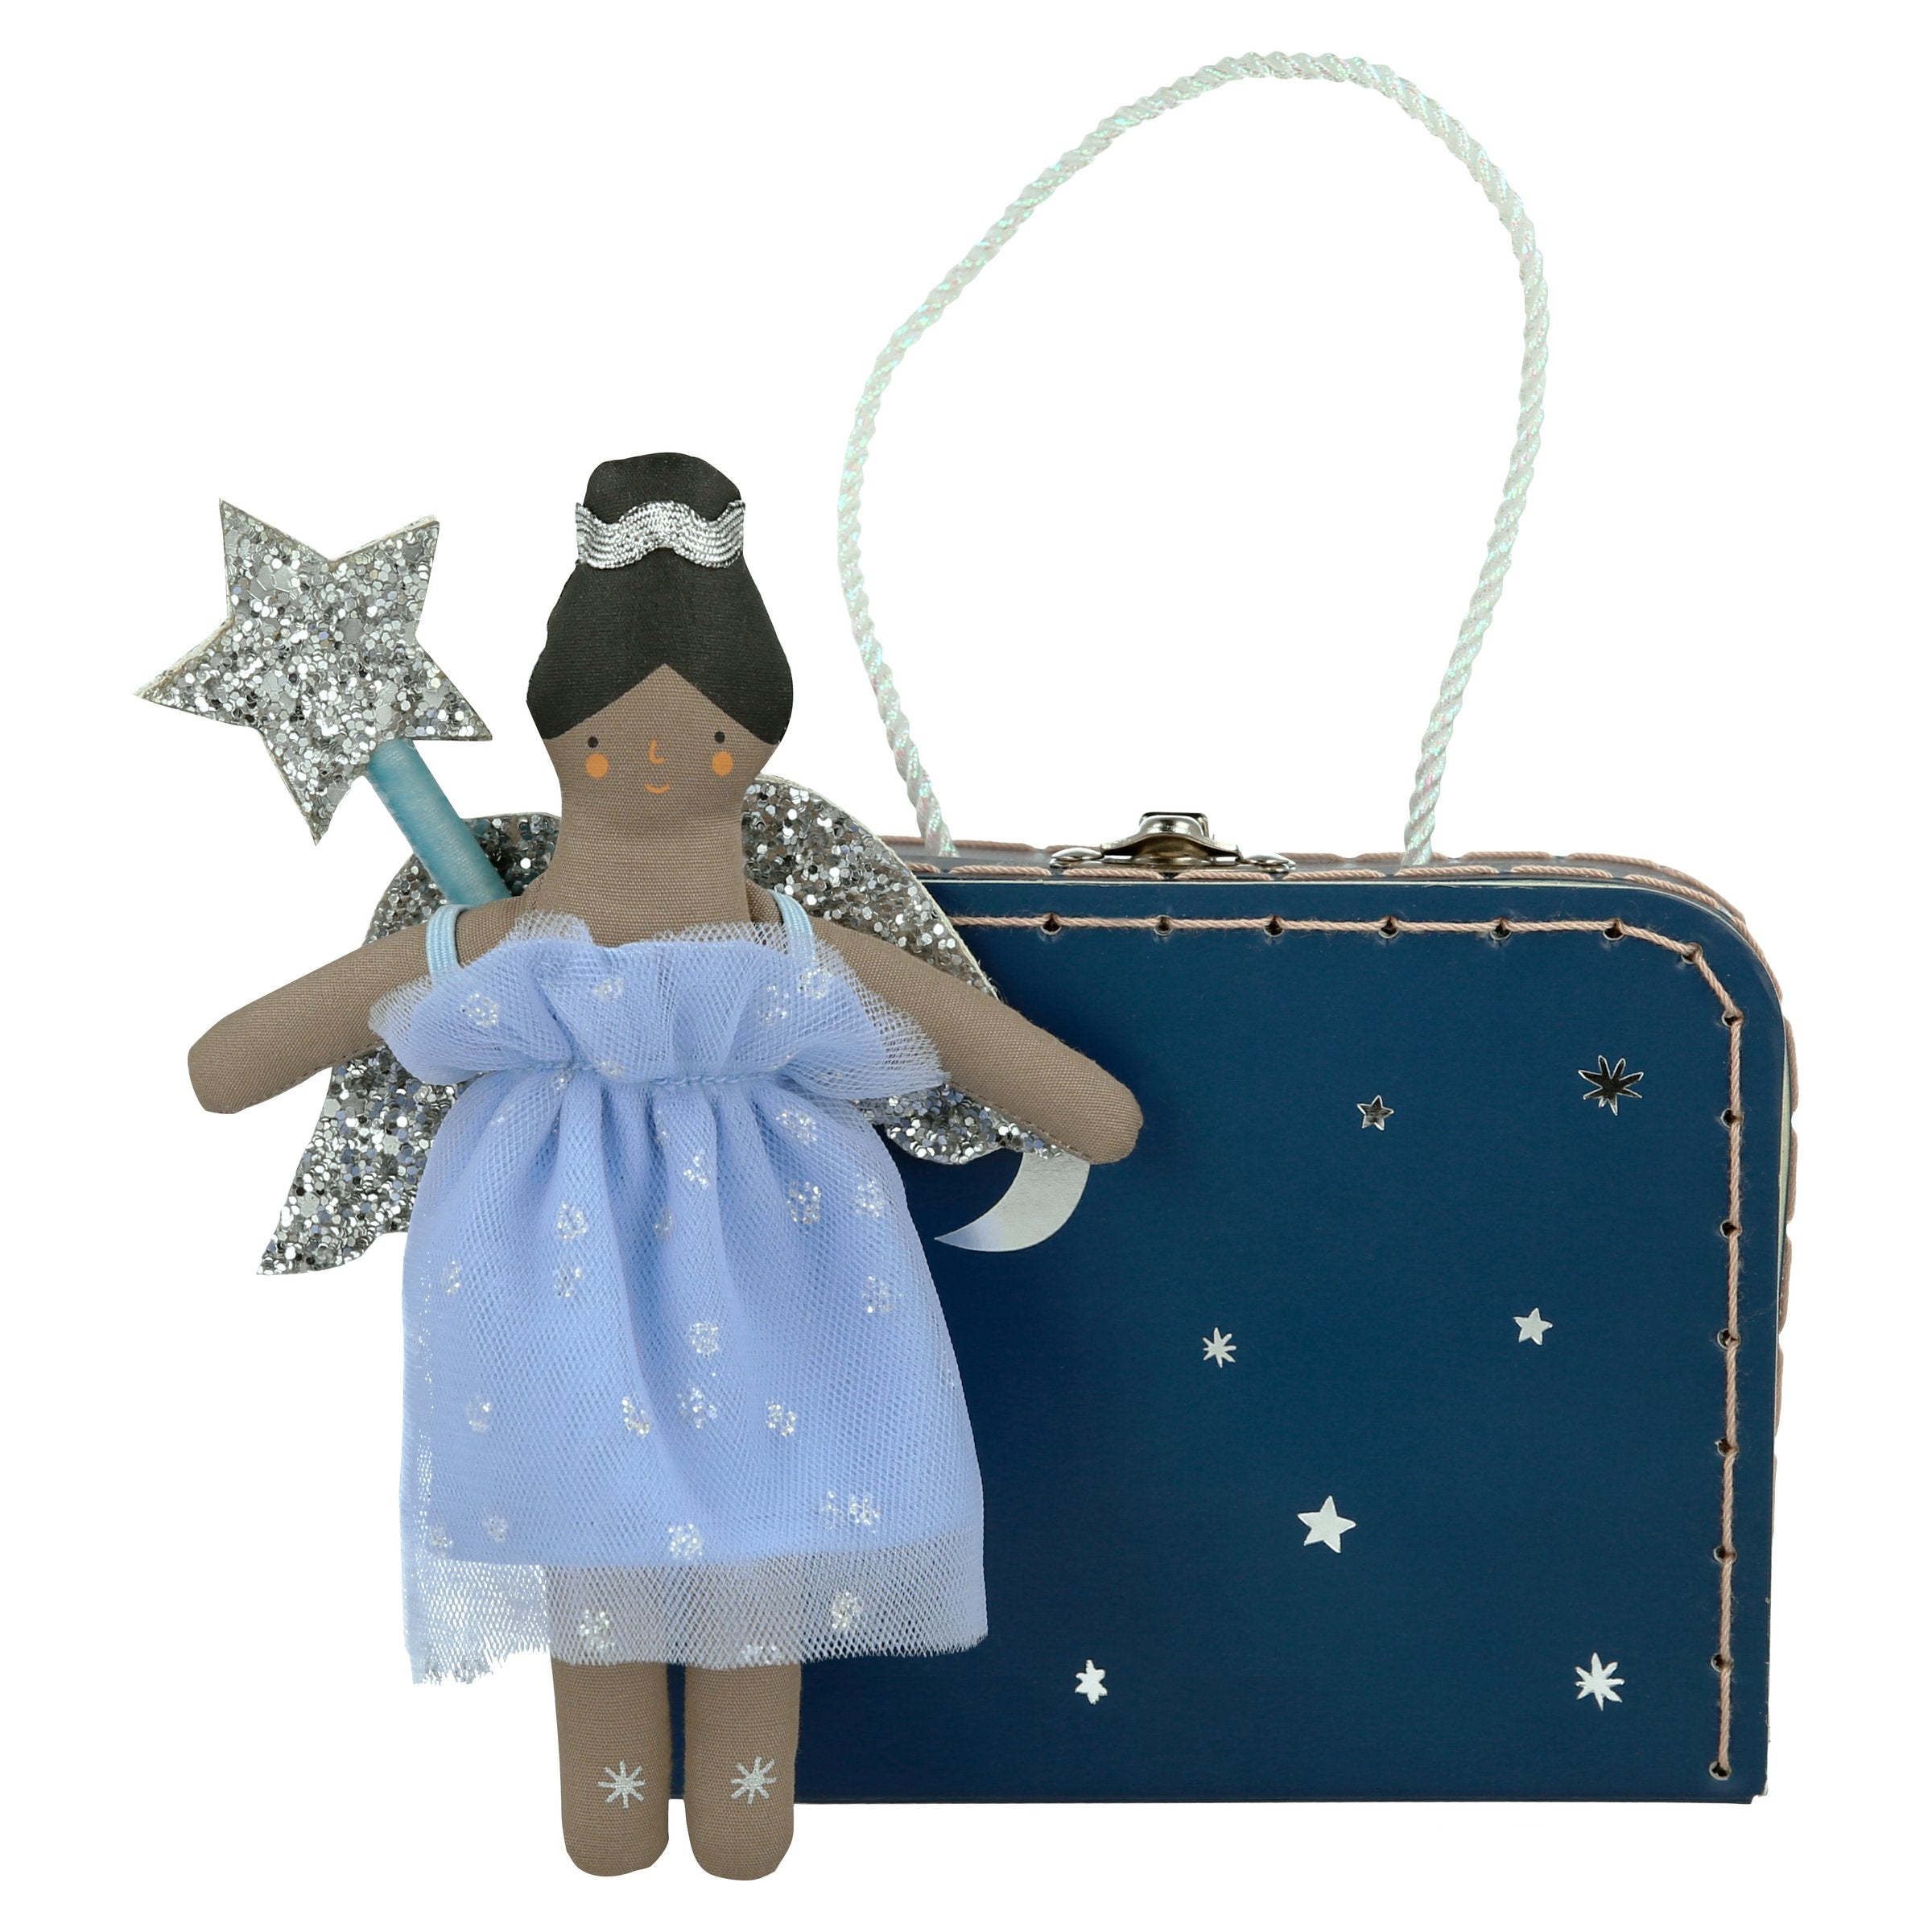 Our mini doll Ruby the Fairy, comes with mini suitcase.